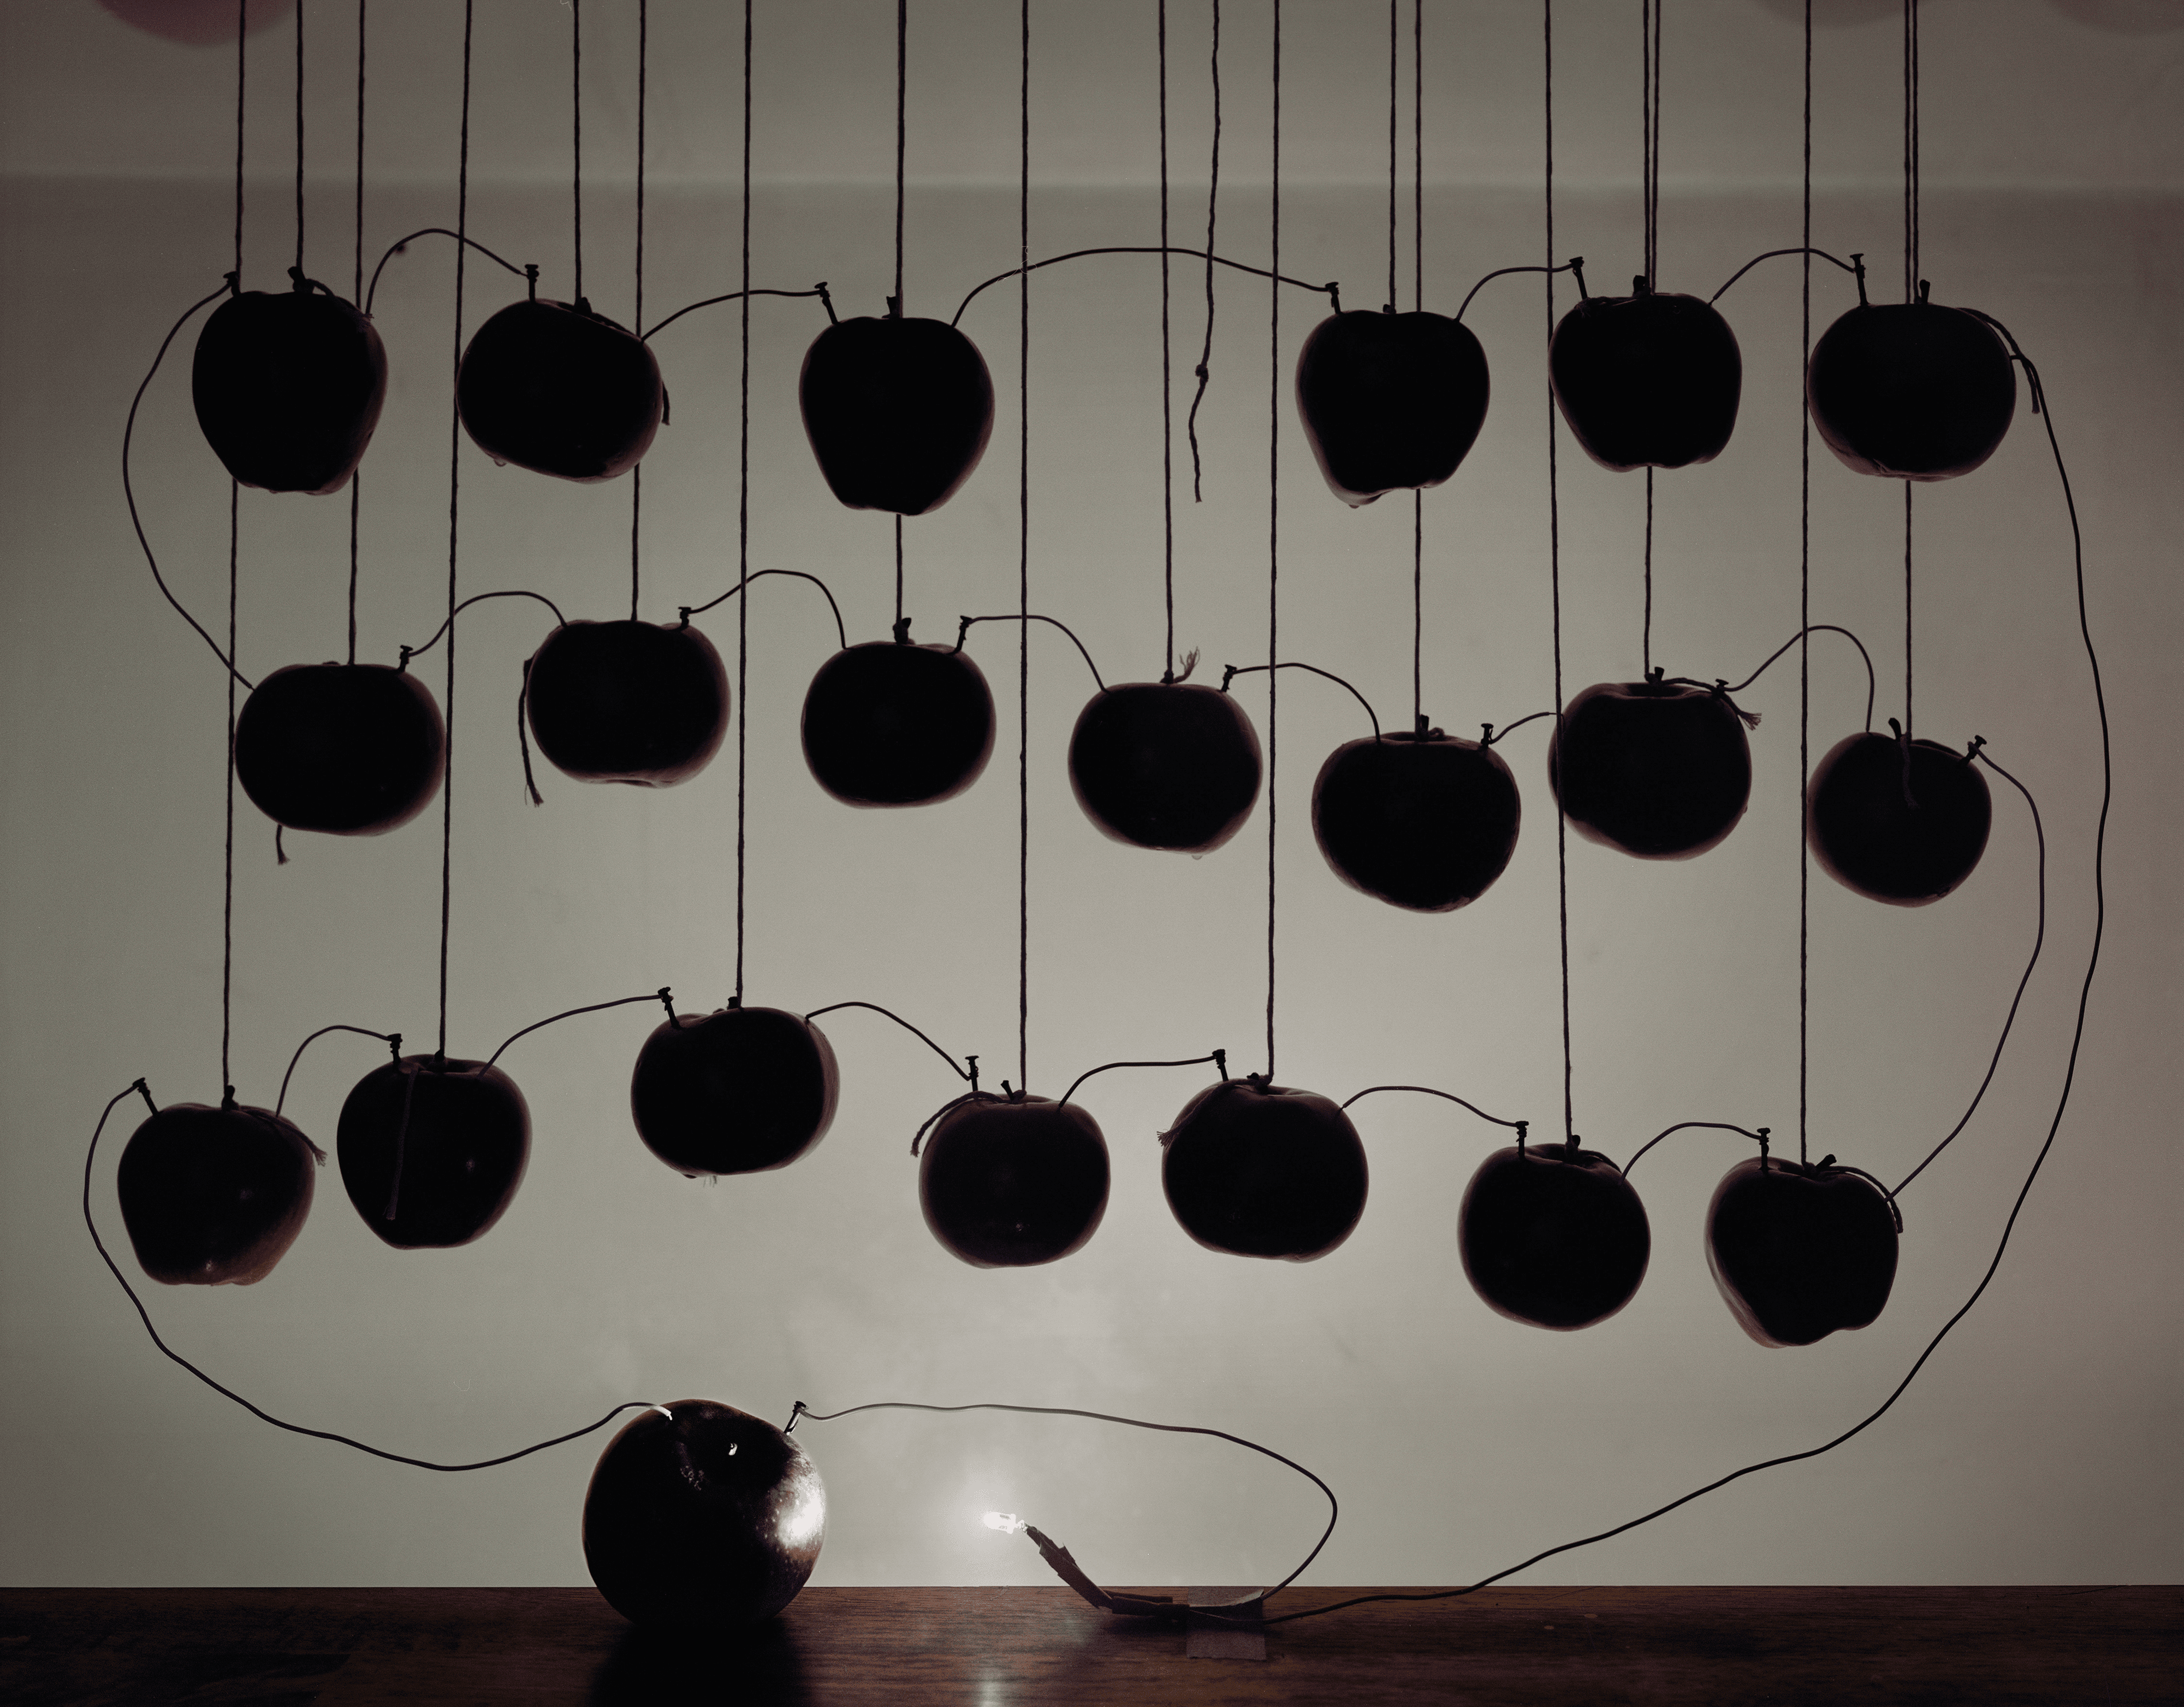 Back to Light - Battery with Hanging Apples, 2013